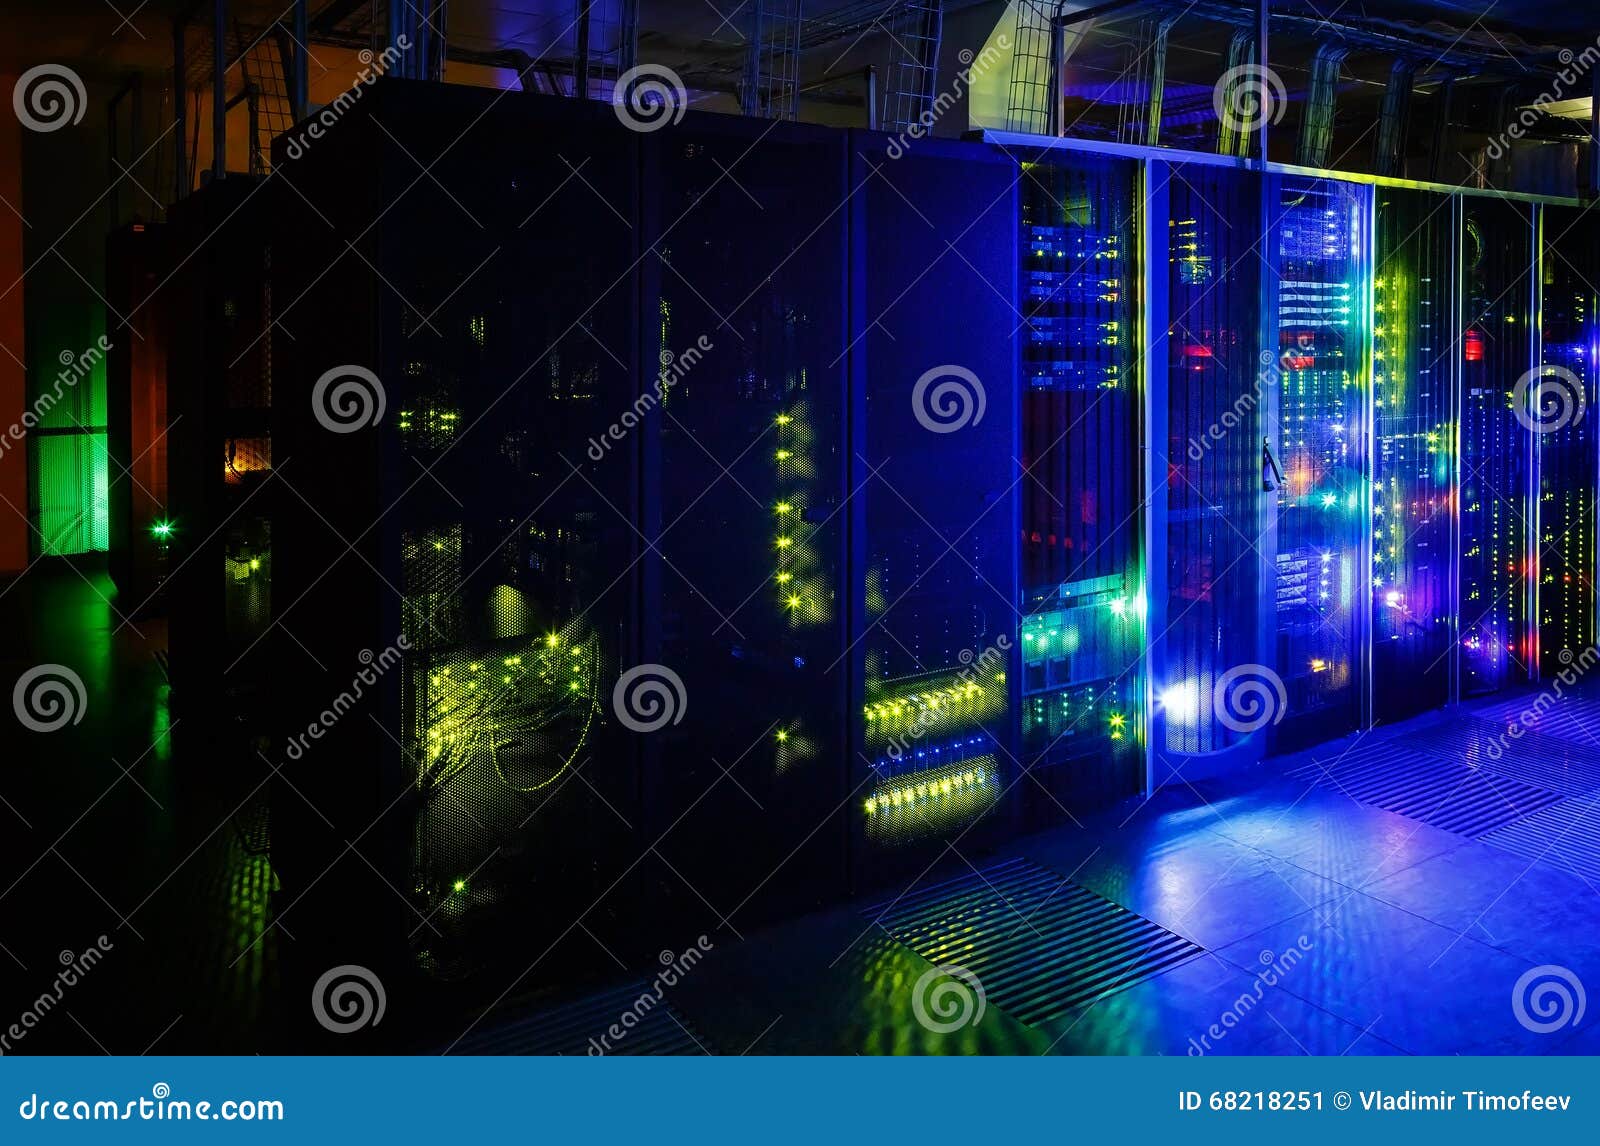 Server Room In The Dark With Bright Colored Lights Stock